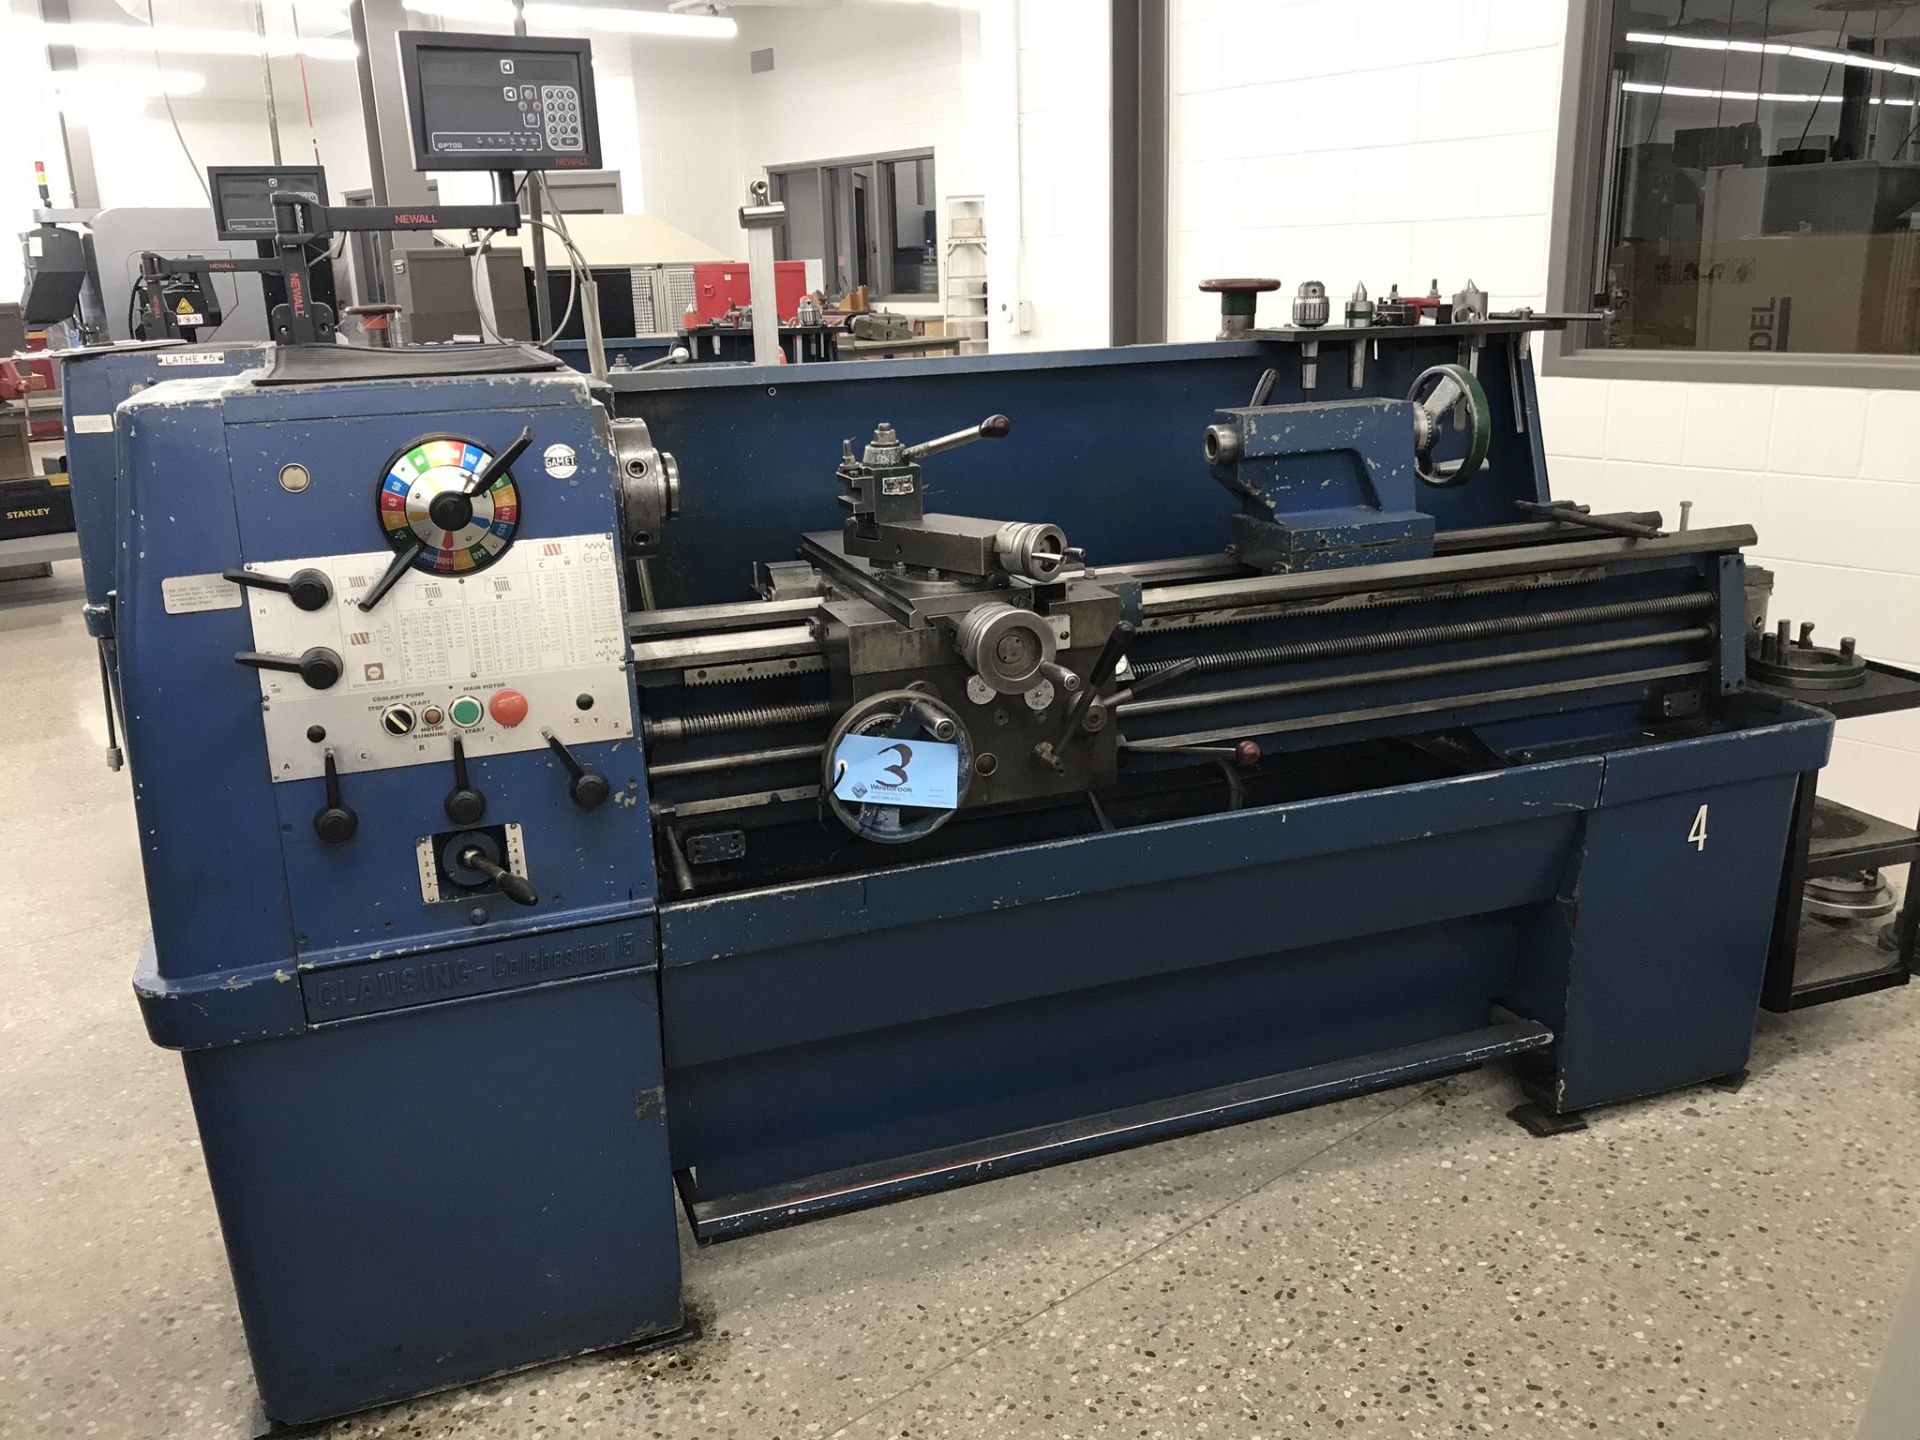 Clausing Colchester 15" x 50" Toolroom Lathe  8" 3 jaw, 10" 4 jaw, Collet set, Aloris Tool Post, DRO